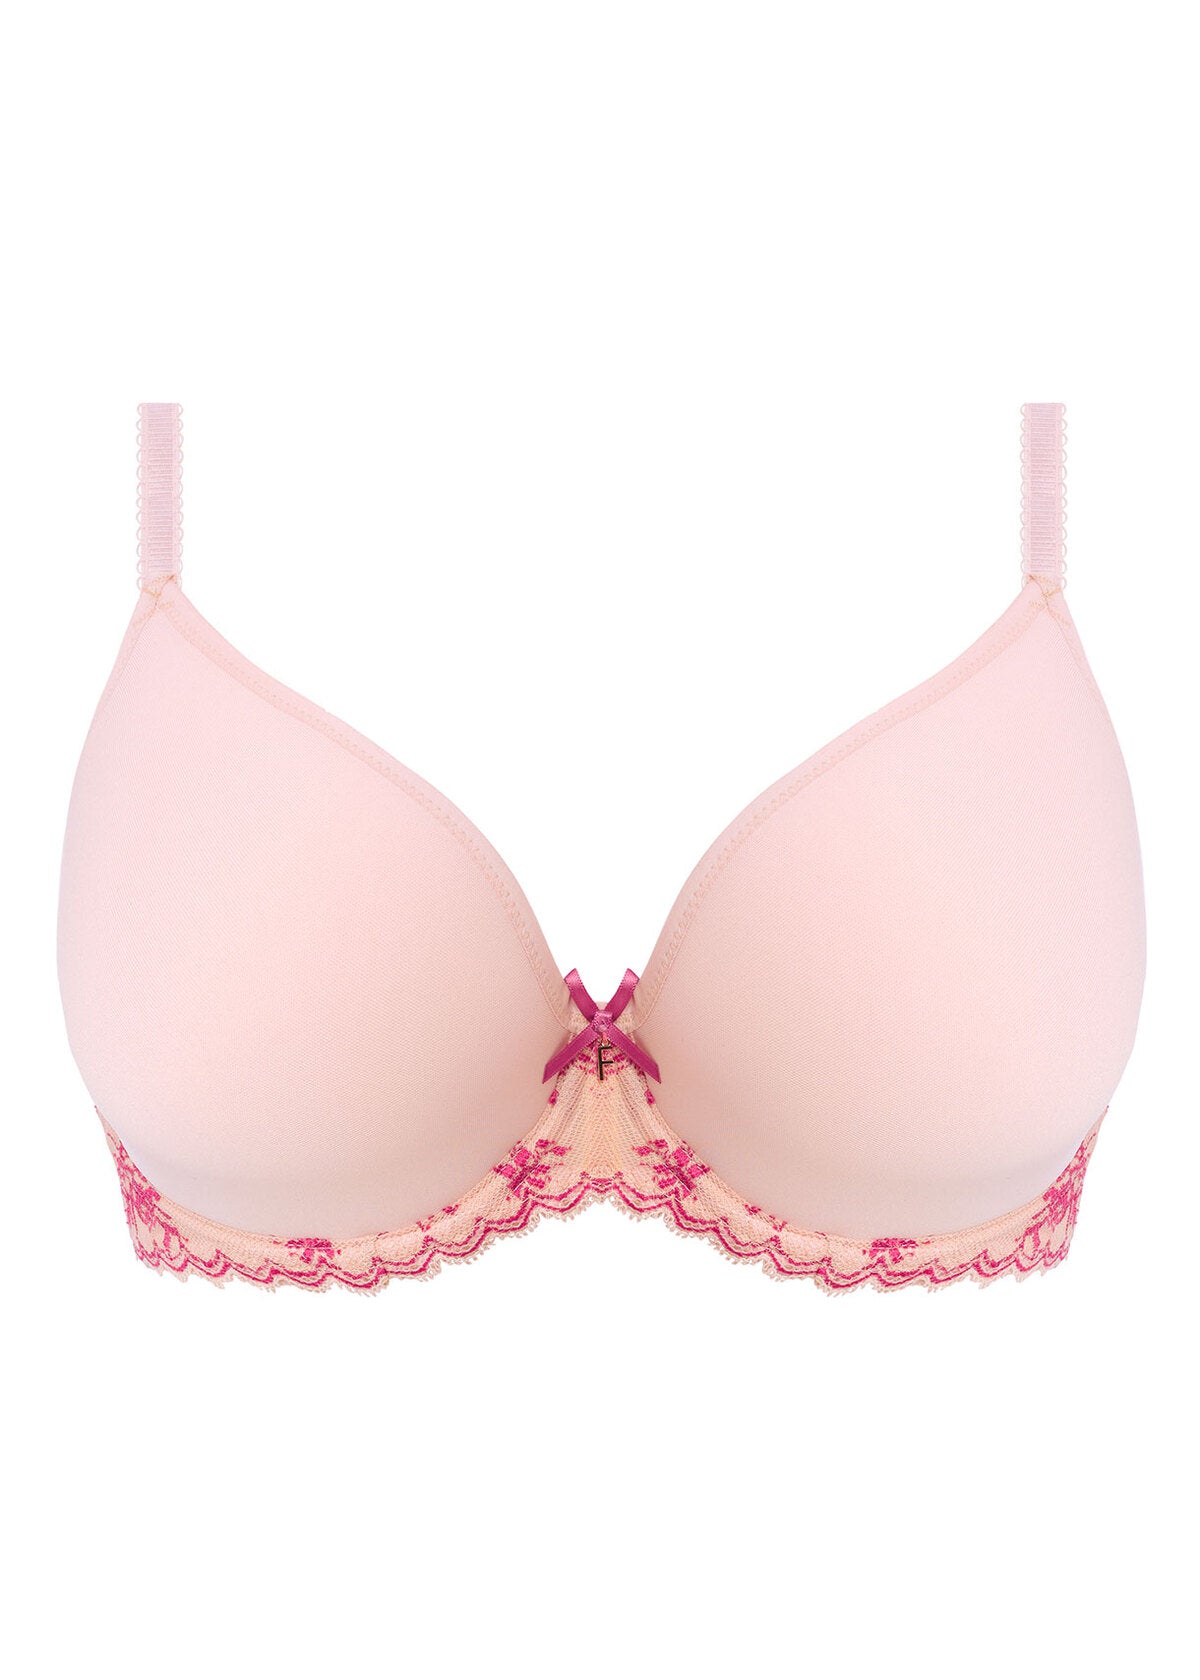 Offbeat Decadence Moulded Spacer Bra